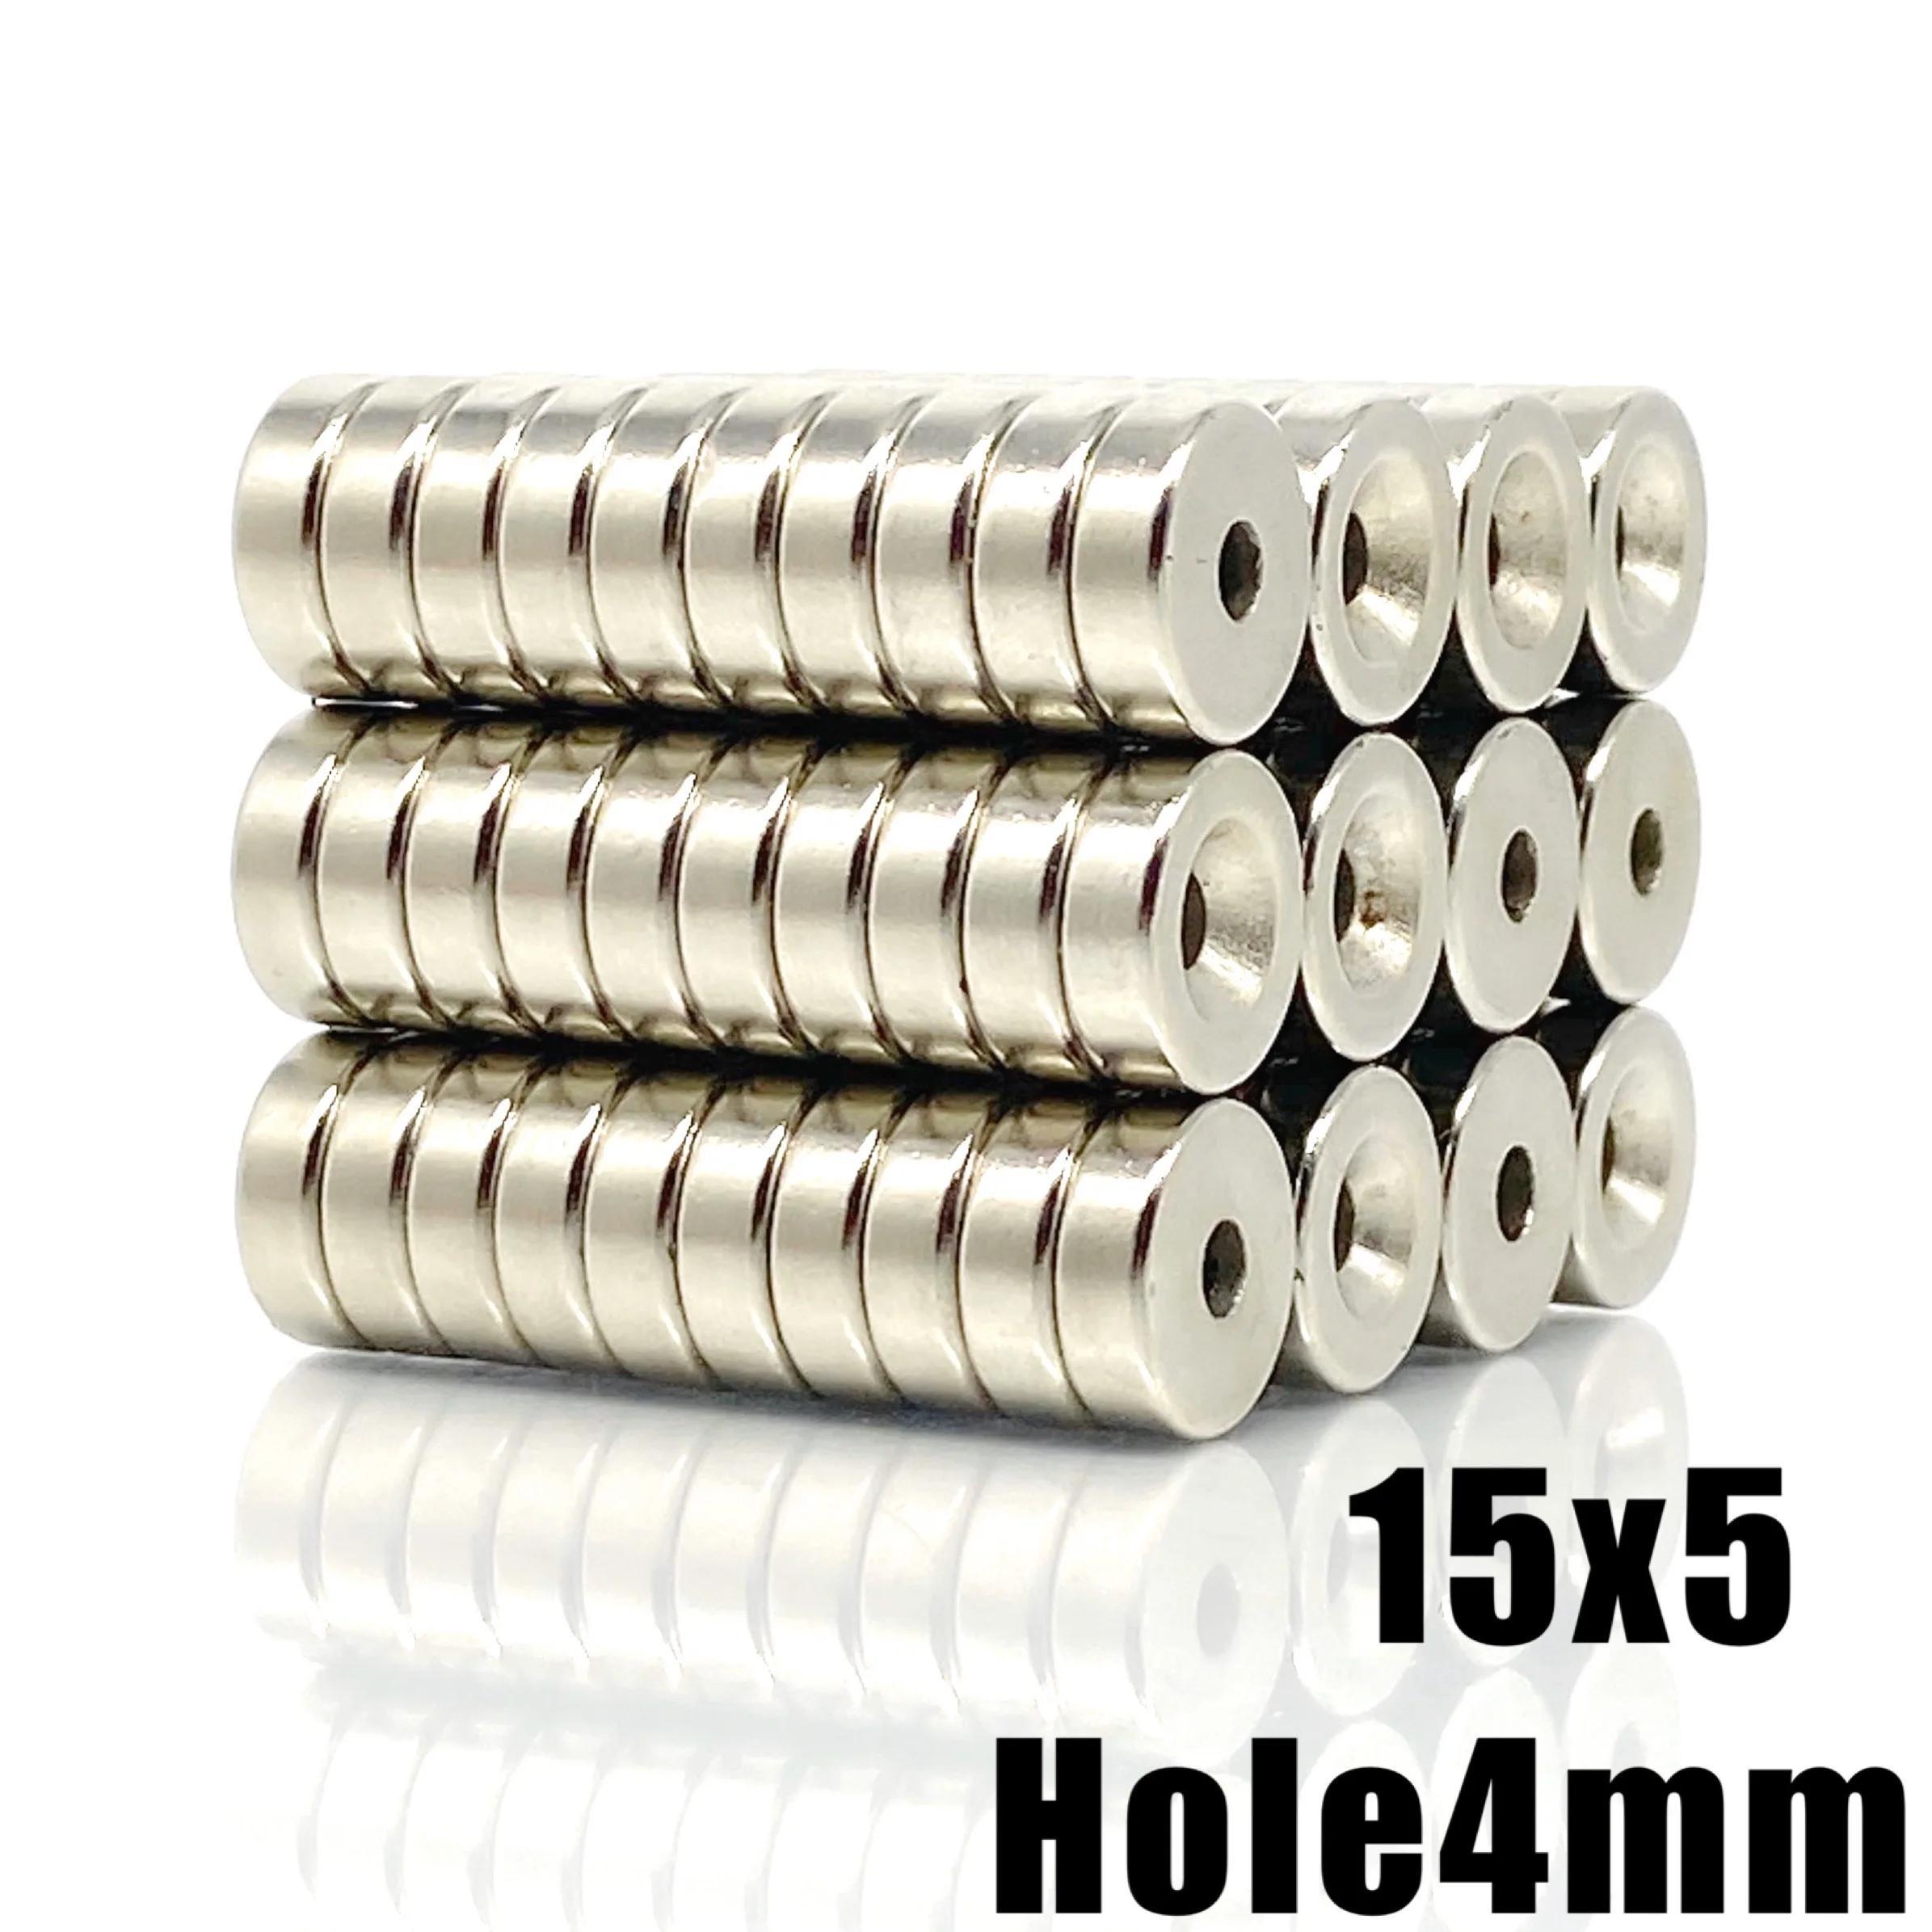 

20/50pcs 15x5-4 Neodymium Magnet 15mm X 5mm Hole 4mm N35 Ndfeb Round Super Powerful Strong Permanent Magnetic Imanes 15x5 Hole 4